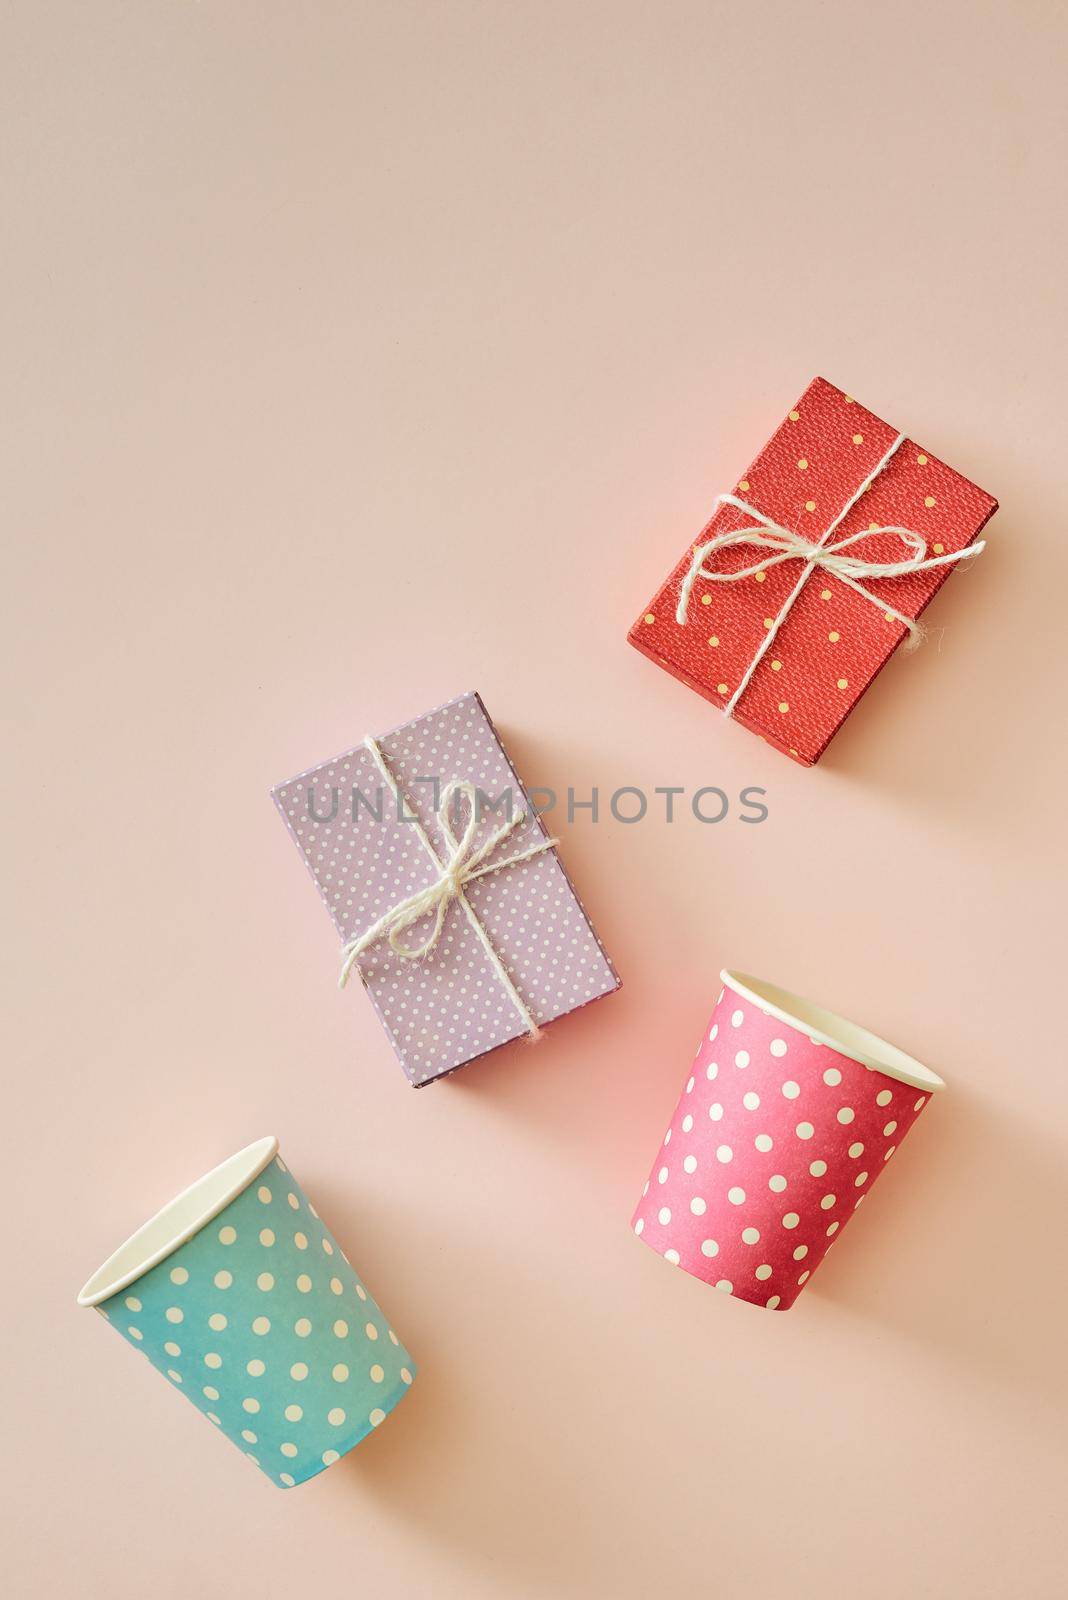 Cups and gift boxes wrapped in polka dots colorful paper by makidotvn